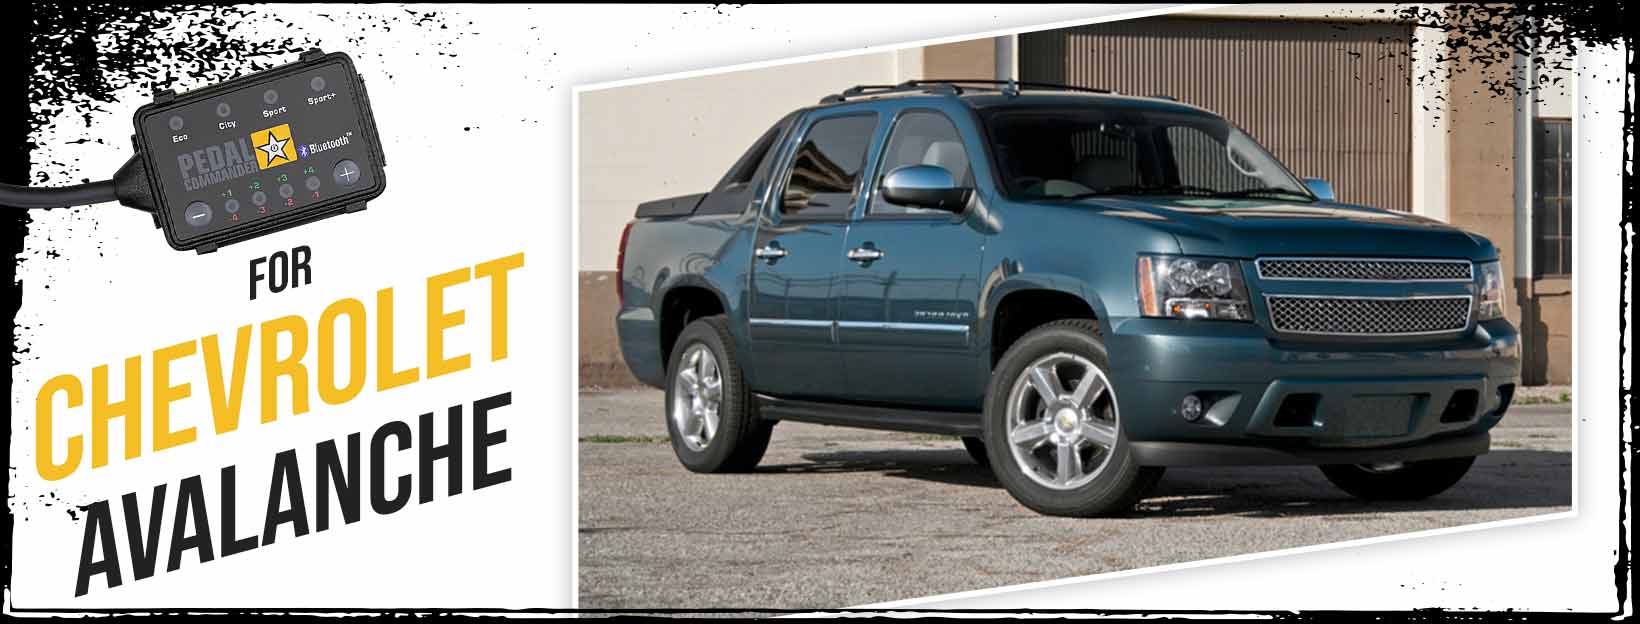 Pedal Commander for Chevrolet Avalanche